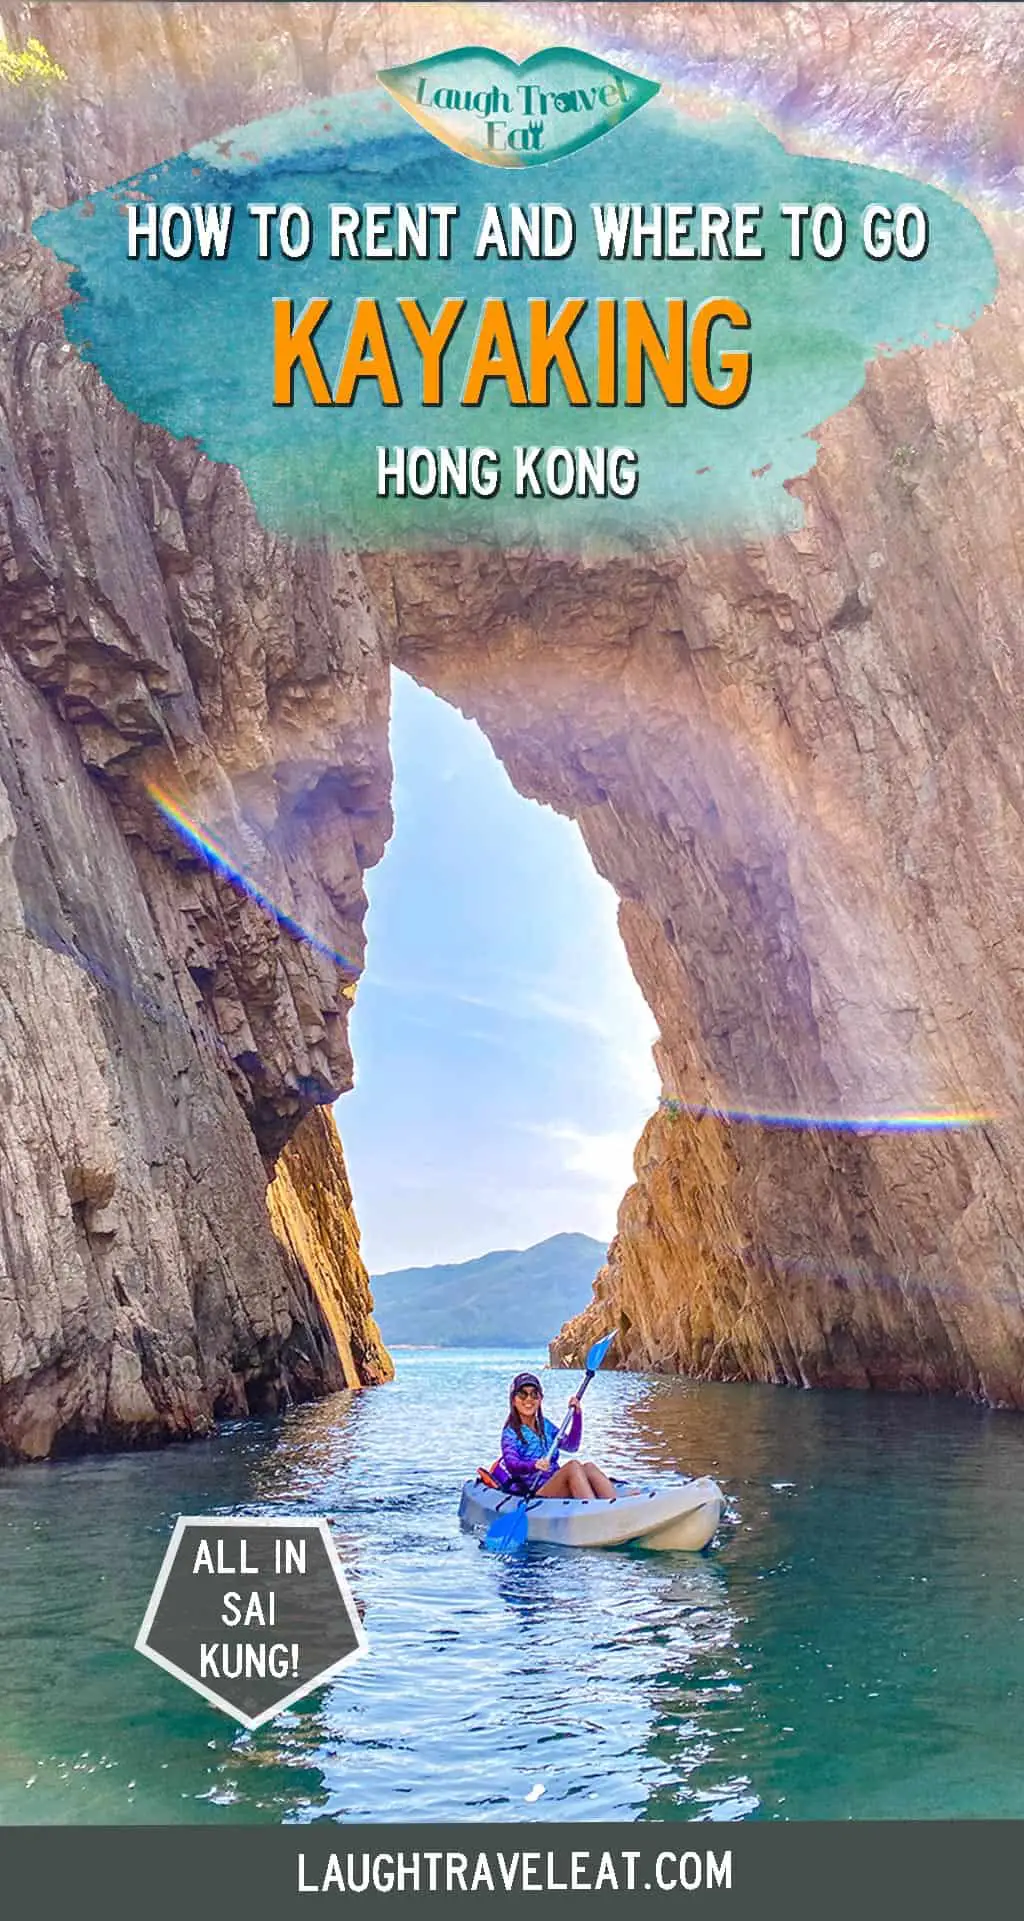 Kayaking in Sai Kung is one of the best summer activities to do in Hong Kong. Believe it or not, this concrete jungle has a pretty amazing coastline hidden and Sai Kung is one of the best. As we have a long summer here from May until basically October, it’s too hot for hiking so most people turn to kayaking. Here's where to go, how to rent, and what to beware of #HongKong #SaiKung #Kayaking